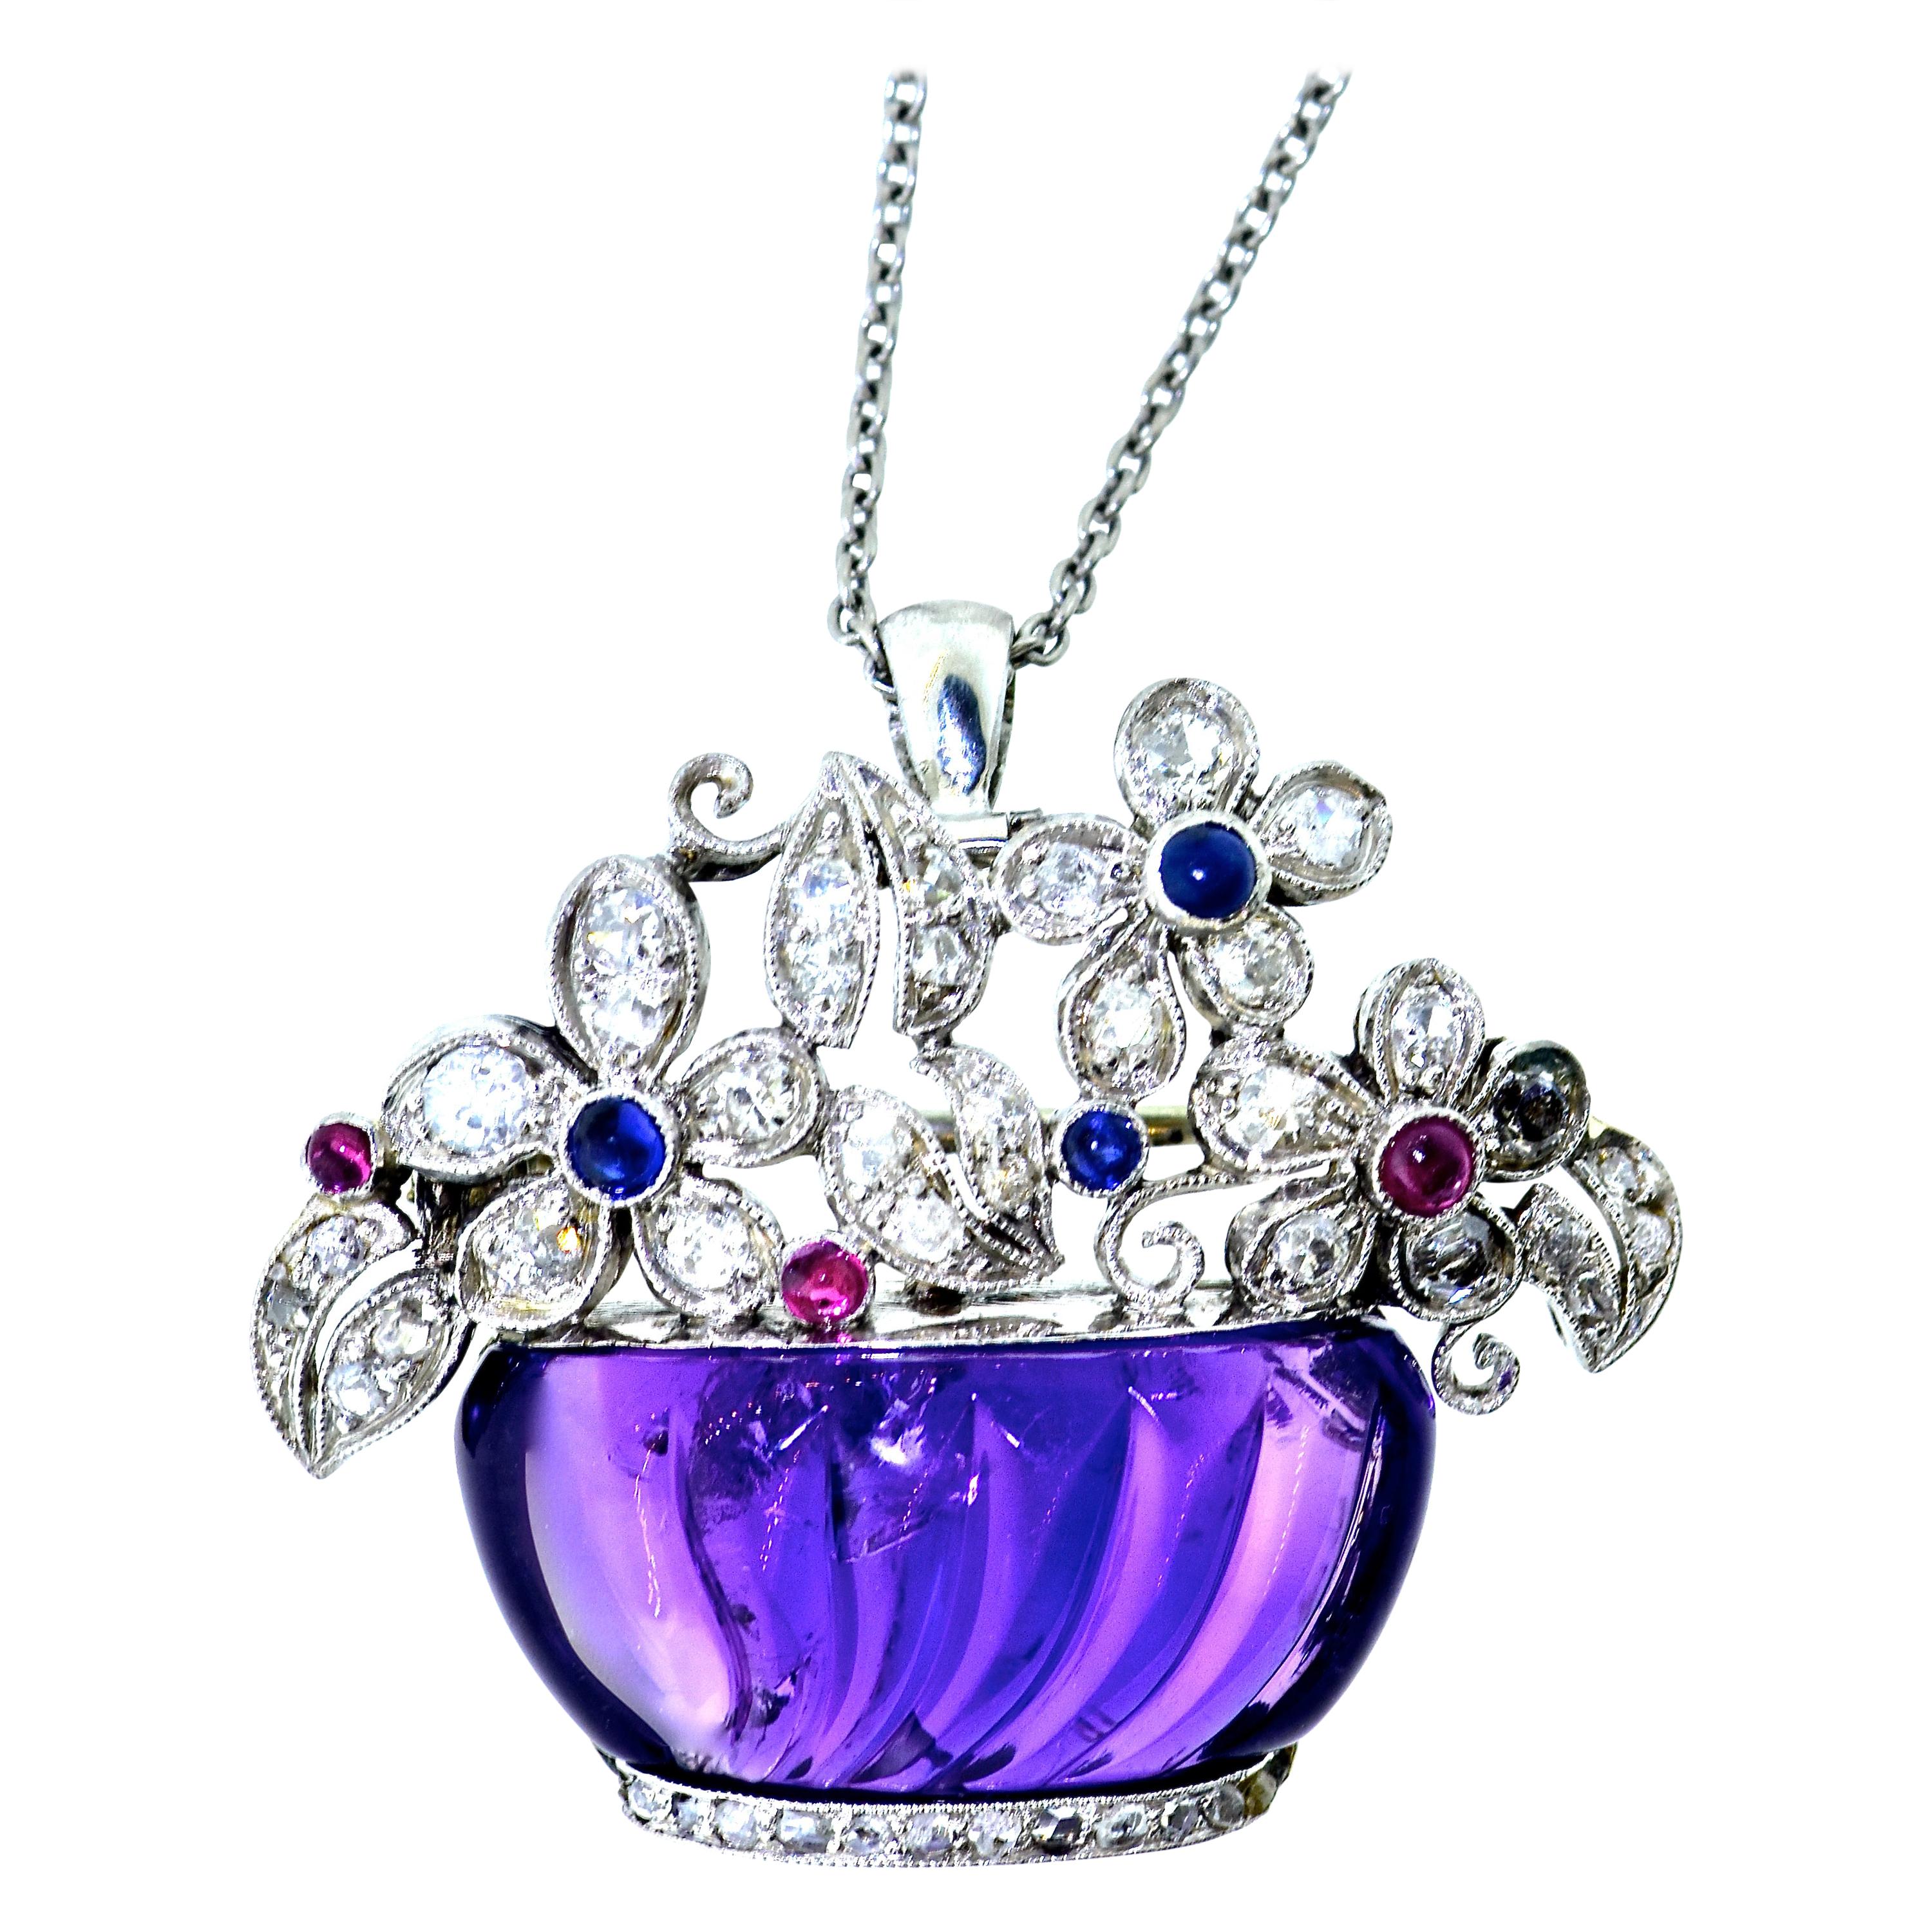 Art Deco pendant with a carved natural amethyst (probably Siberian because of the presences of reddish undertones), creates a platinum, diamond, sapphire and ruby basket of flowers.  Capable of being worn as a pendant or brooch, this charming piece,